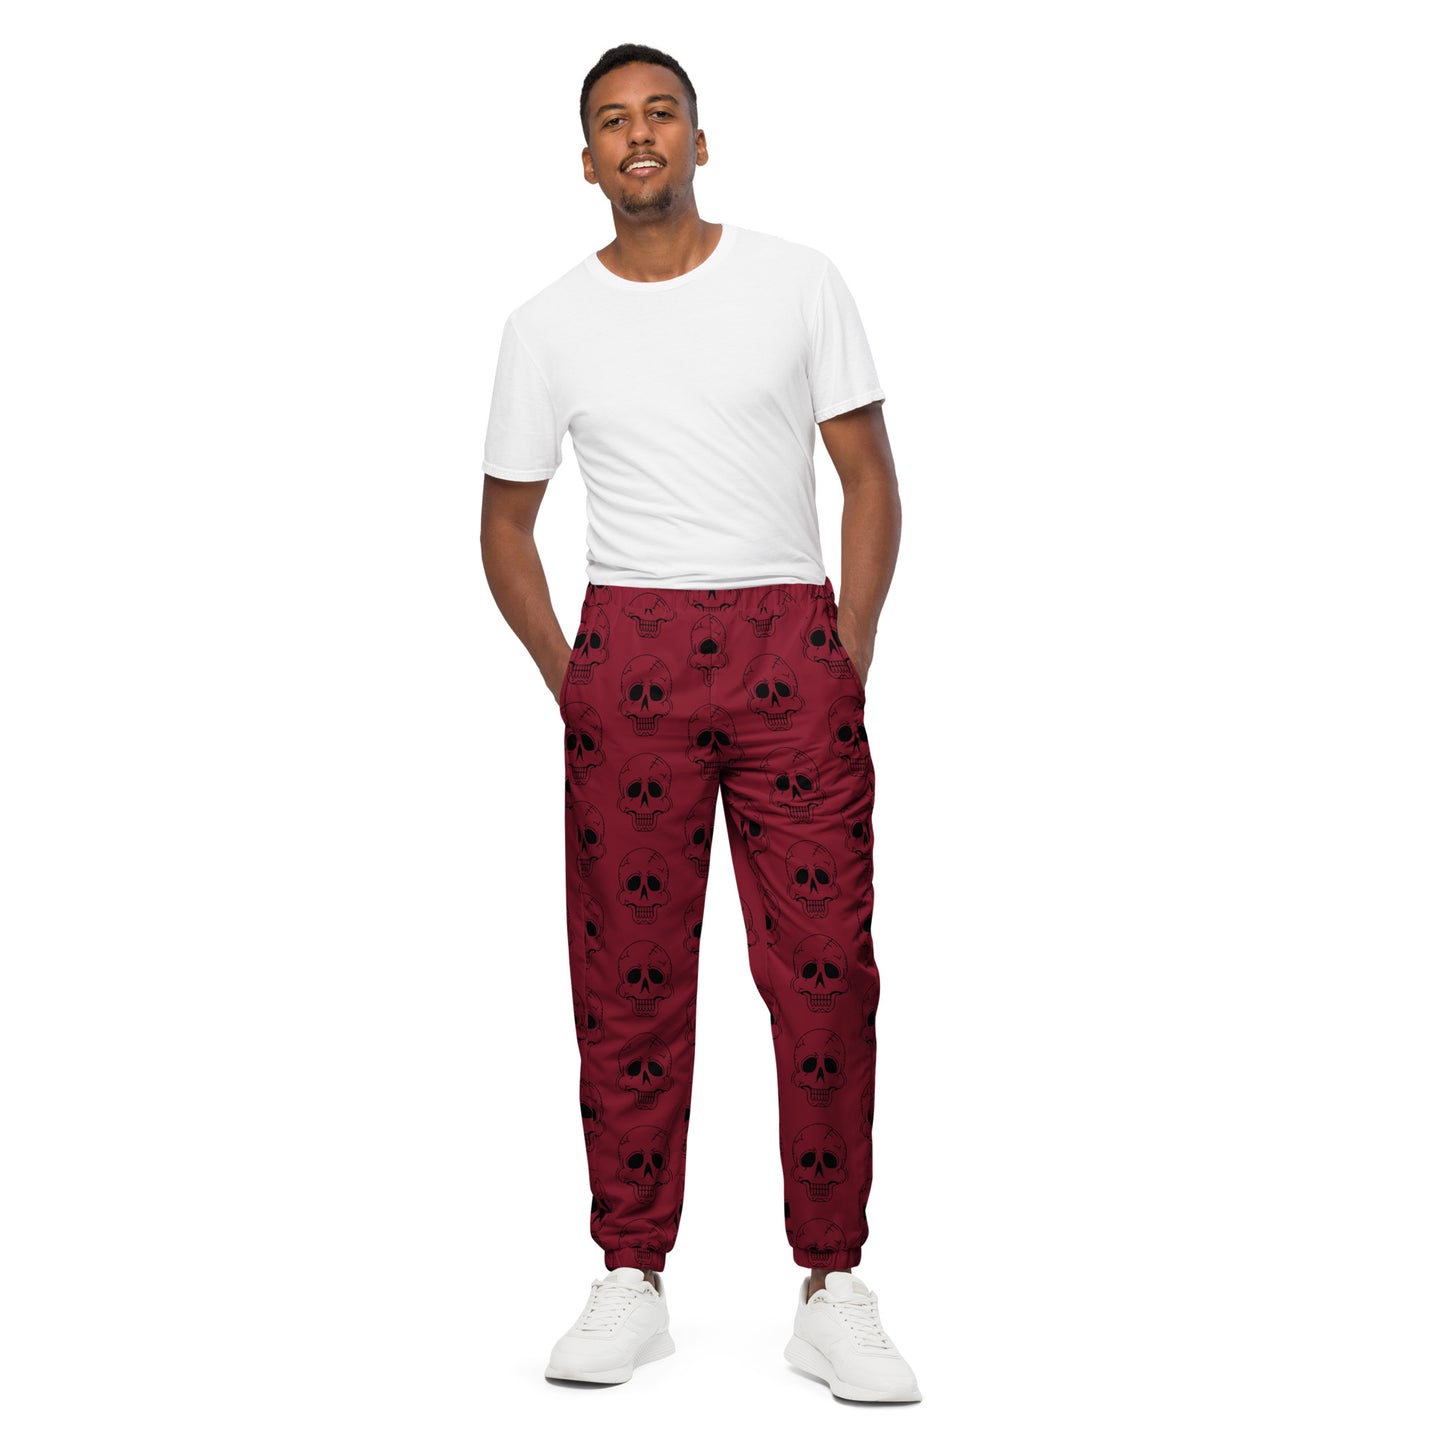 RED LAUGHING SKULL TRACK PANTS